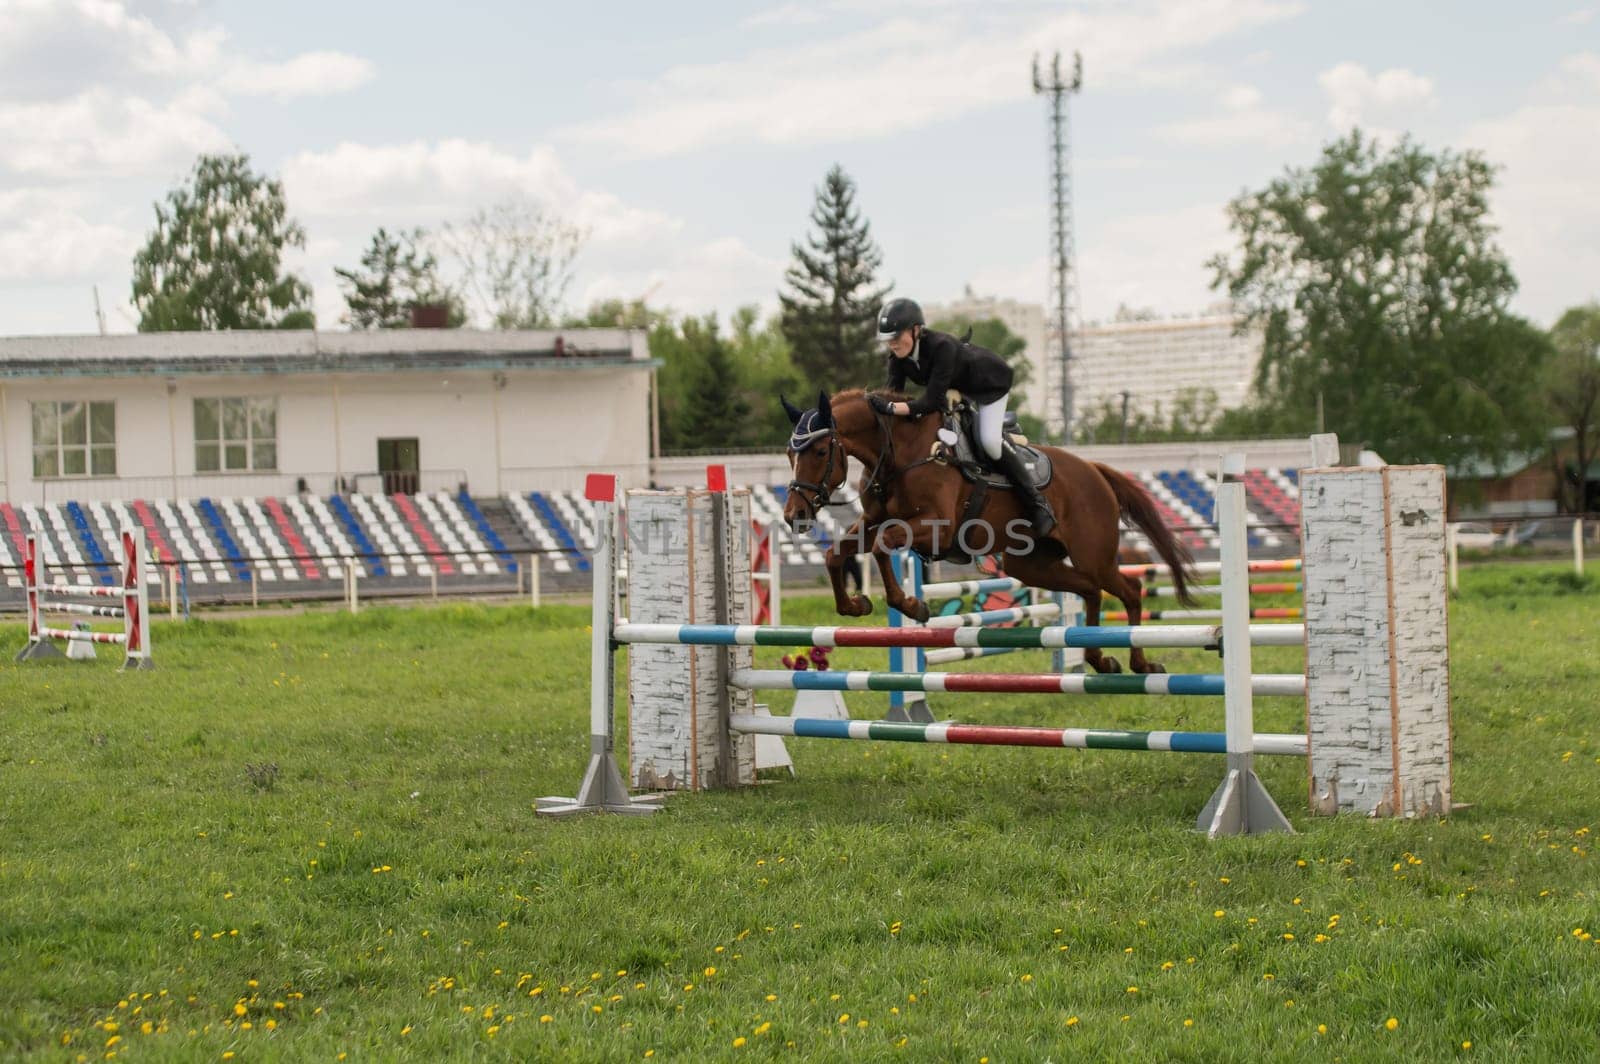 A young girl goes in for horse riding. A horse jumps over a barrier. by mrwed54